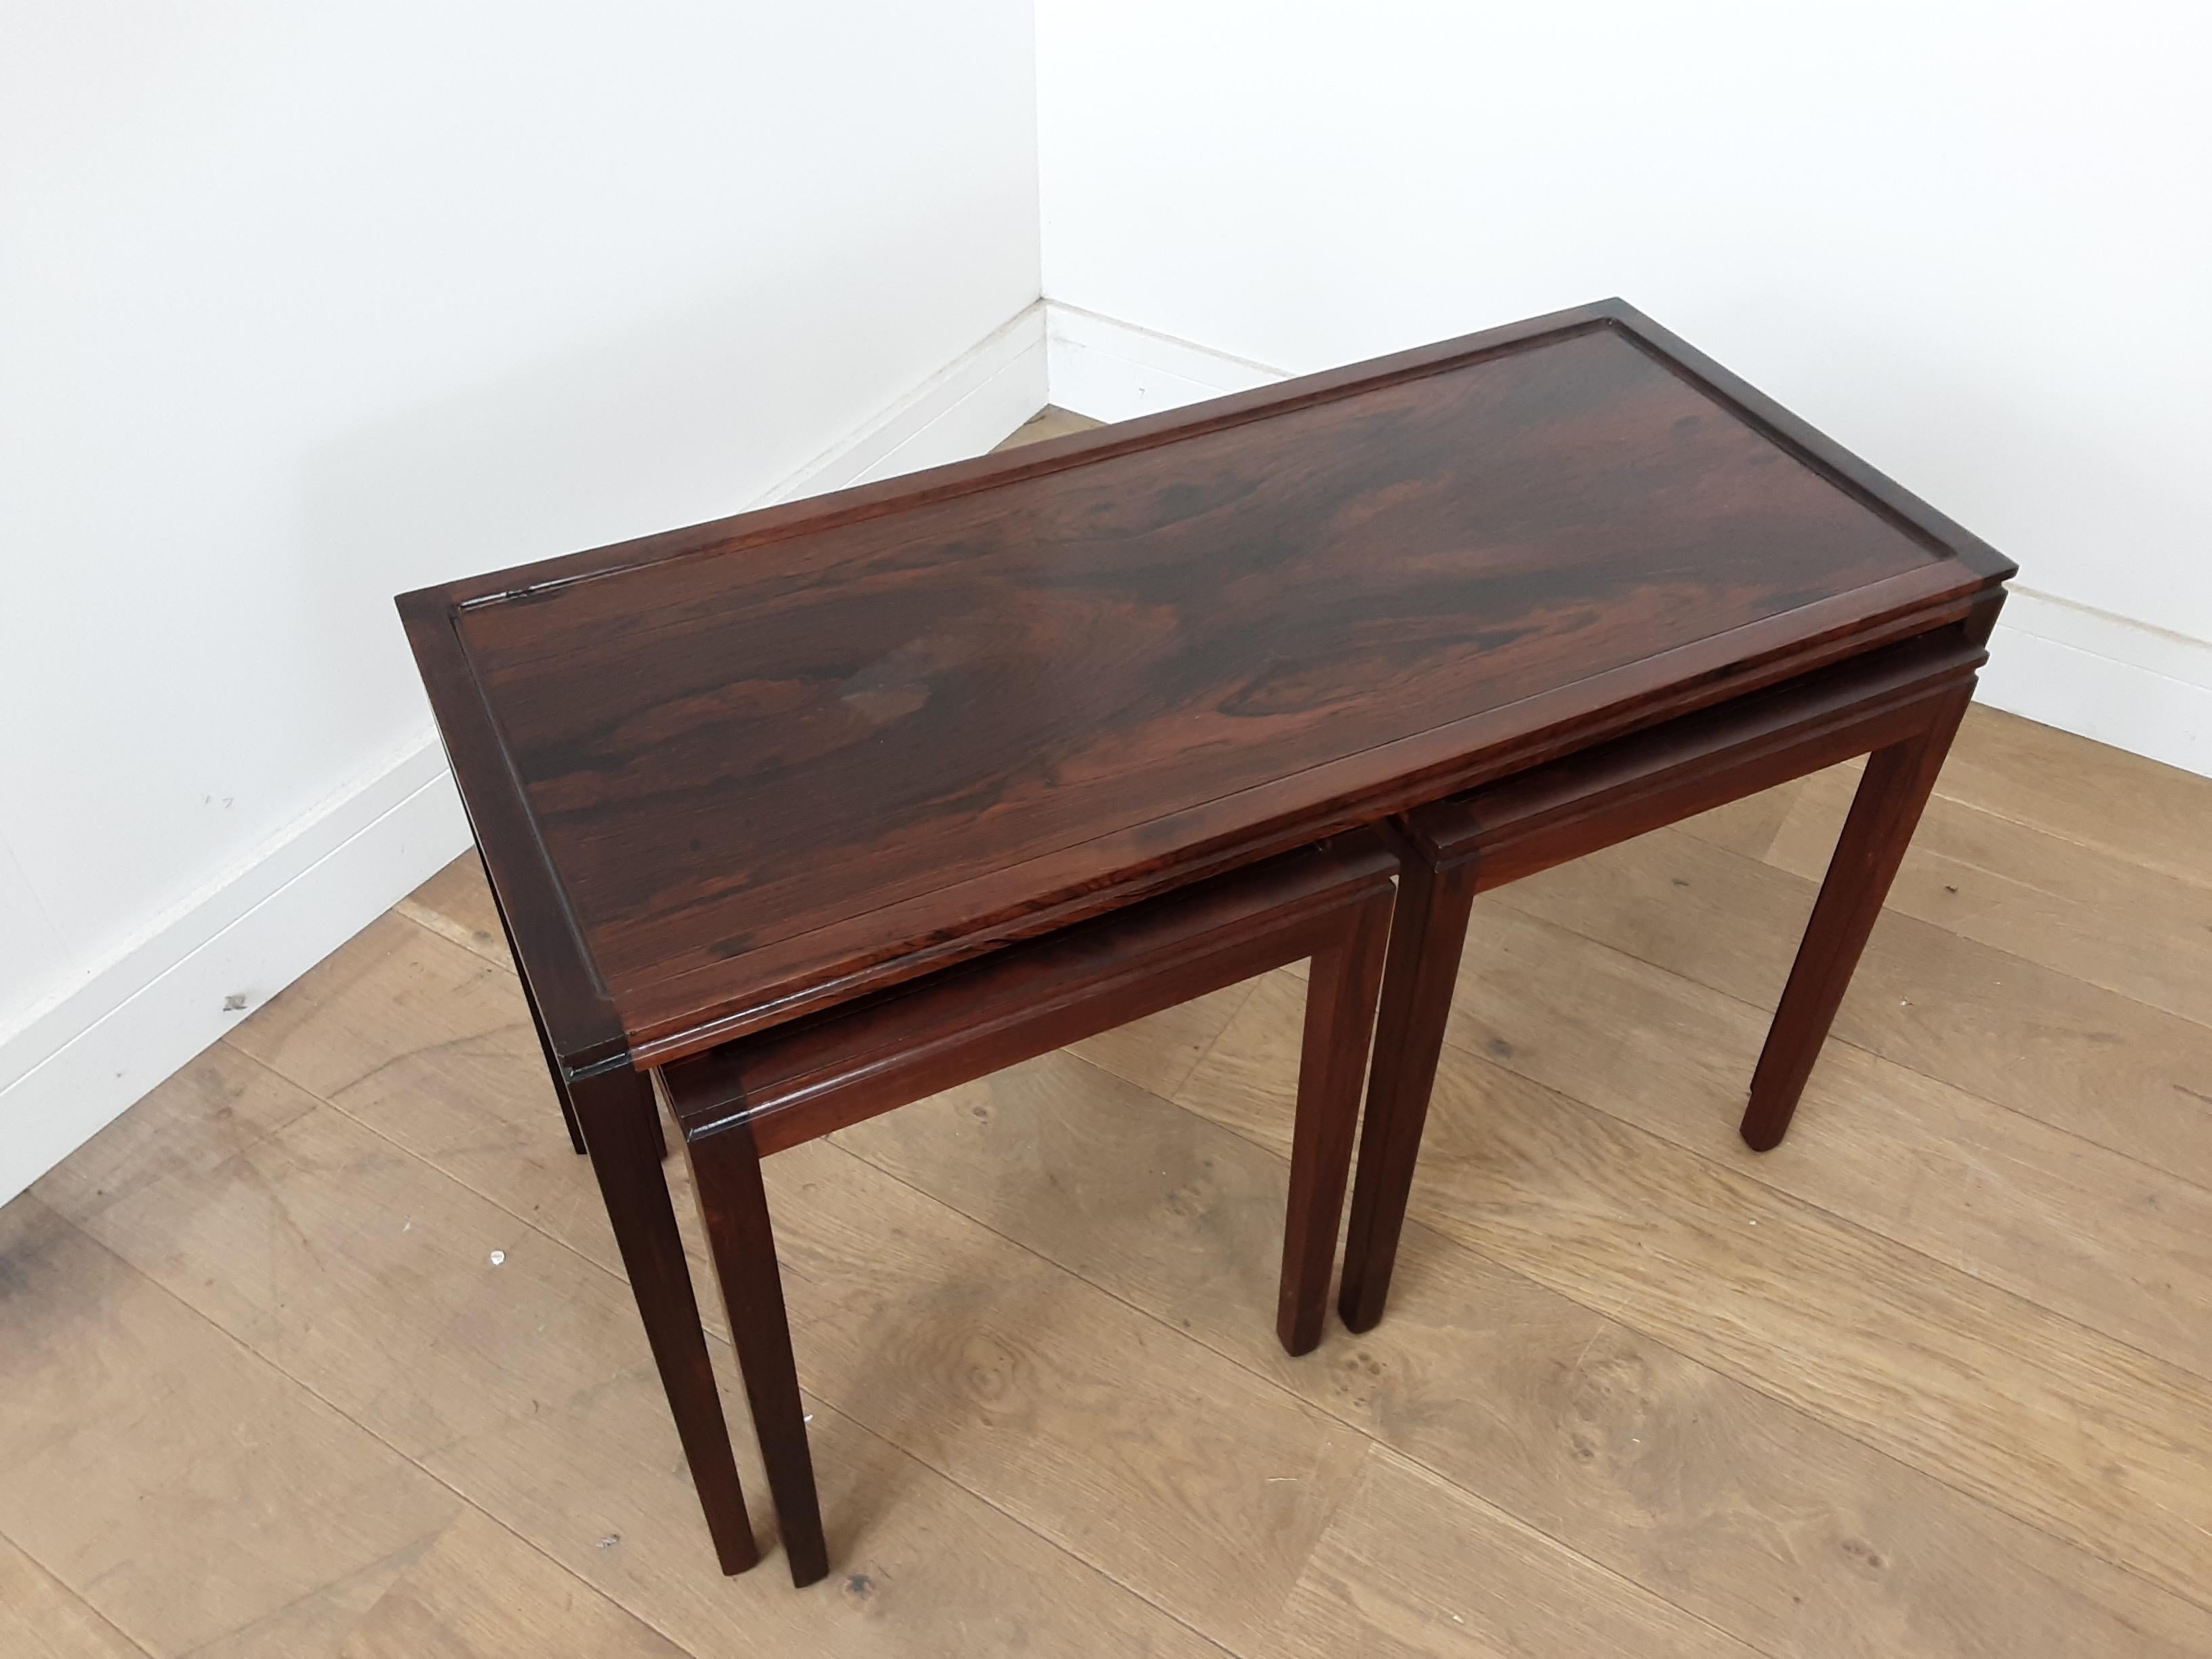 Midcentury rosewood nest of tables.
Midcentury nest of table in a beautiful rosewood.
Slightly raised edge with a good tooled curve into the centre sections.
The rosewood has a very nice grain to it.
Measures: Main table 48.5 cm H, 83 cm W, 36.5